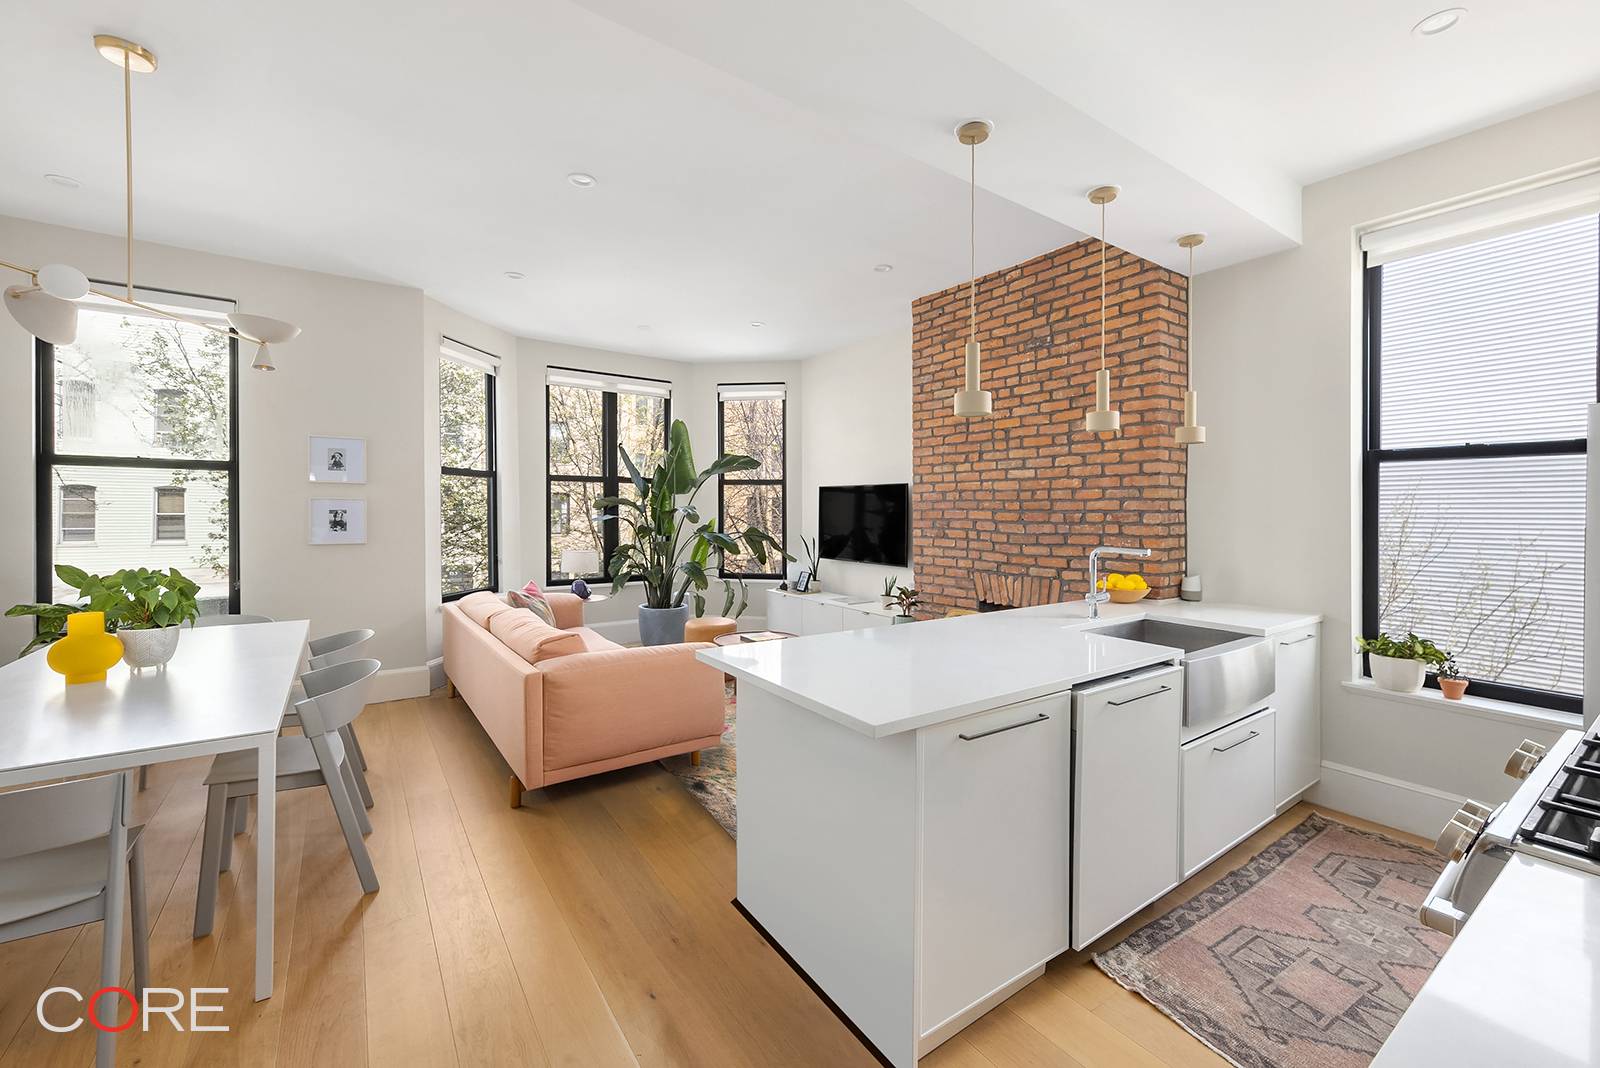 Constructed in 1931 and newly developed in 2019, 68 Grove has been meticulously restored and converted into a rare boutique condominium offering in the heart of Bushwick.